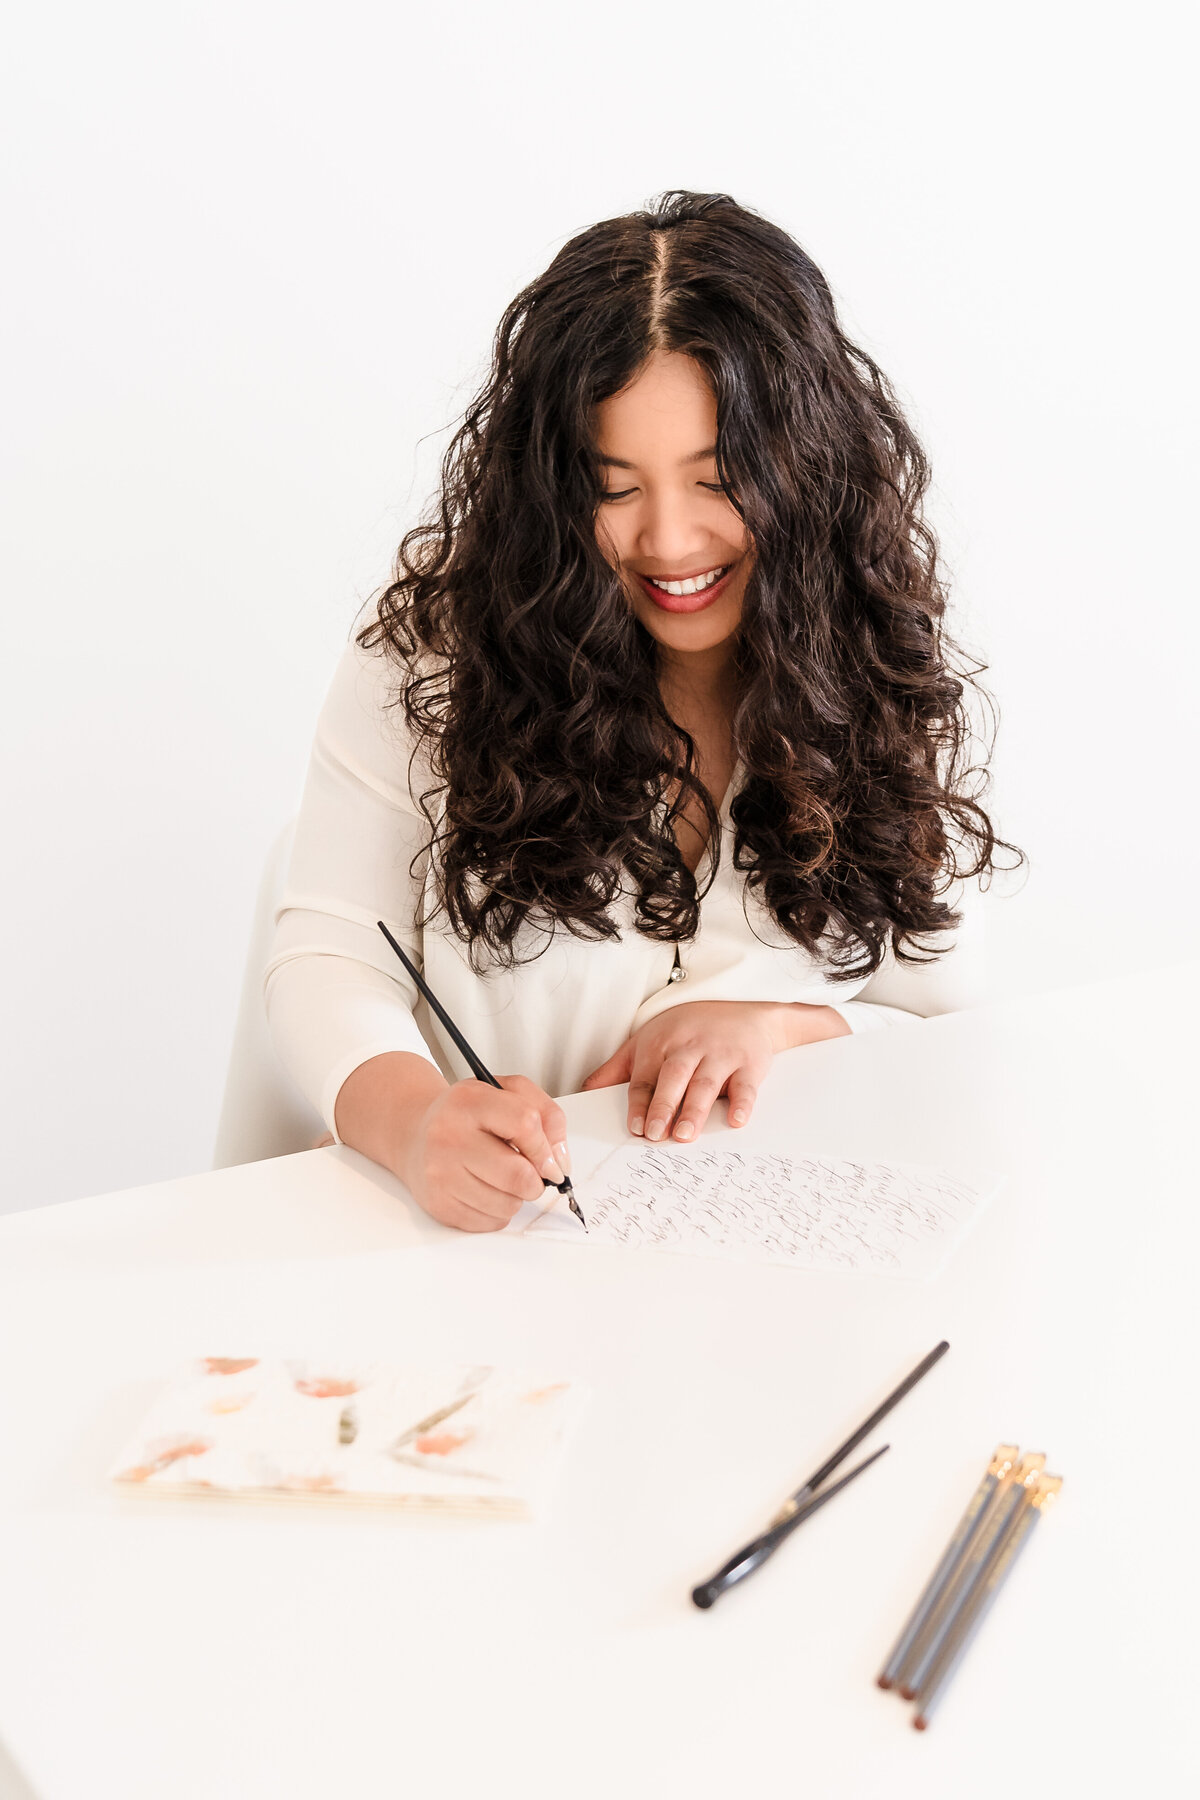 brand photo of a calligrapher with a pen in her hands